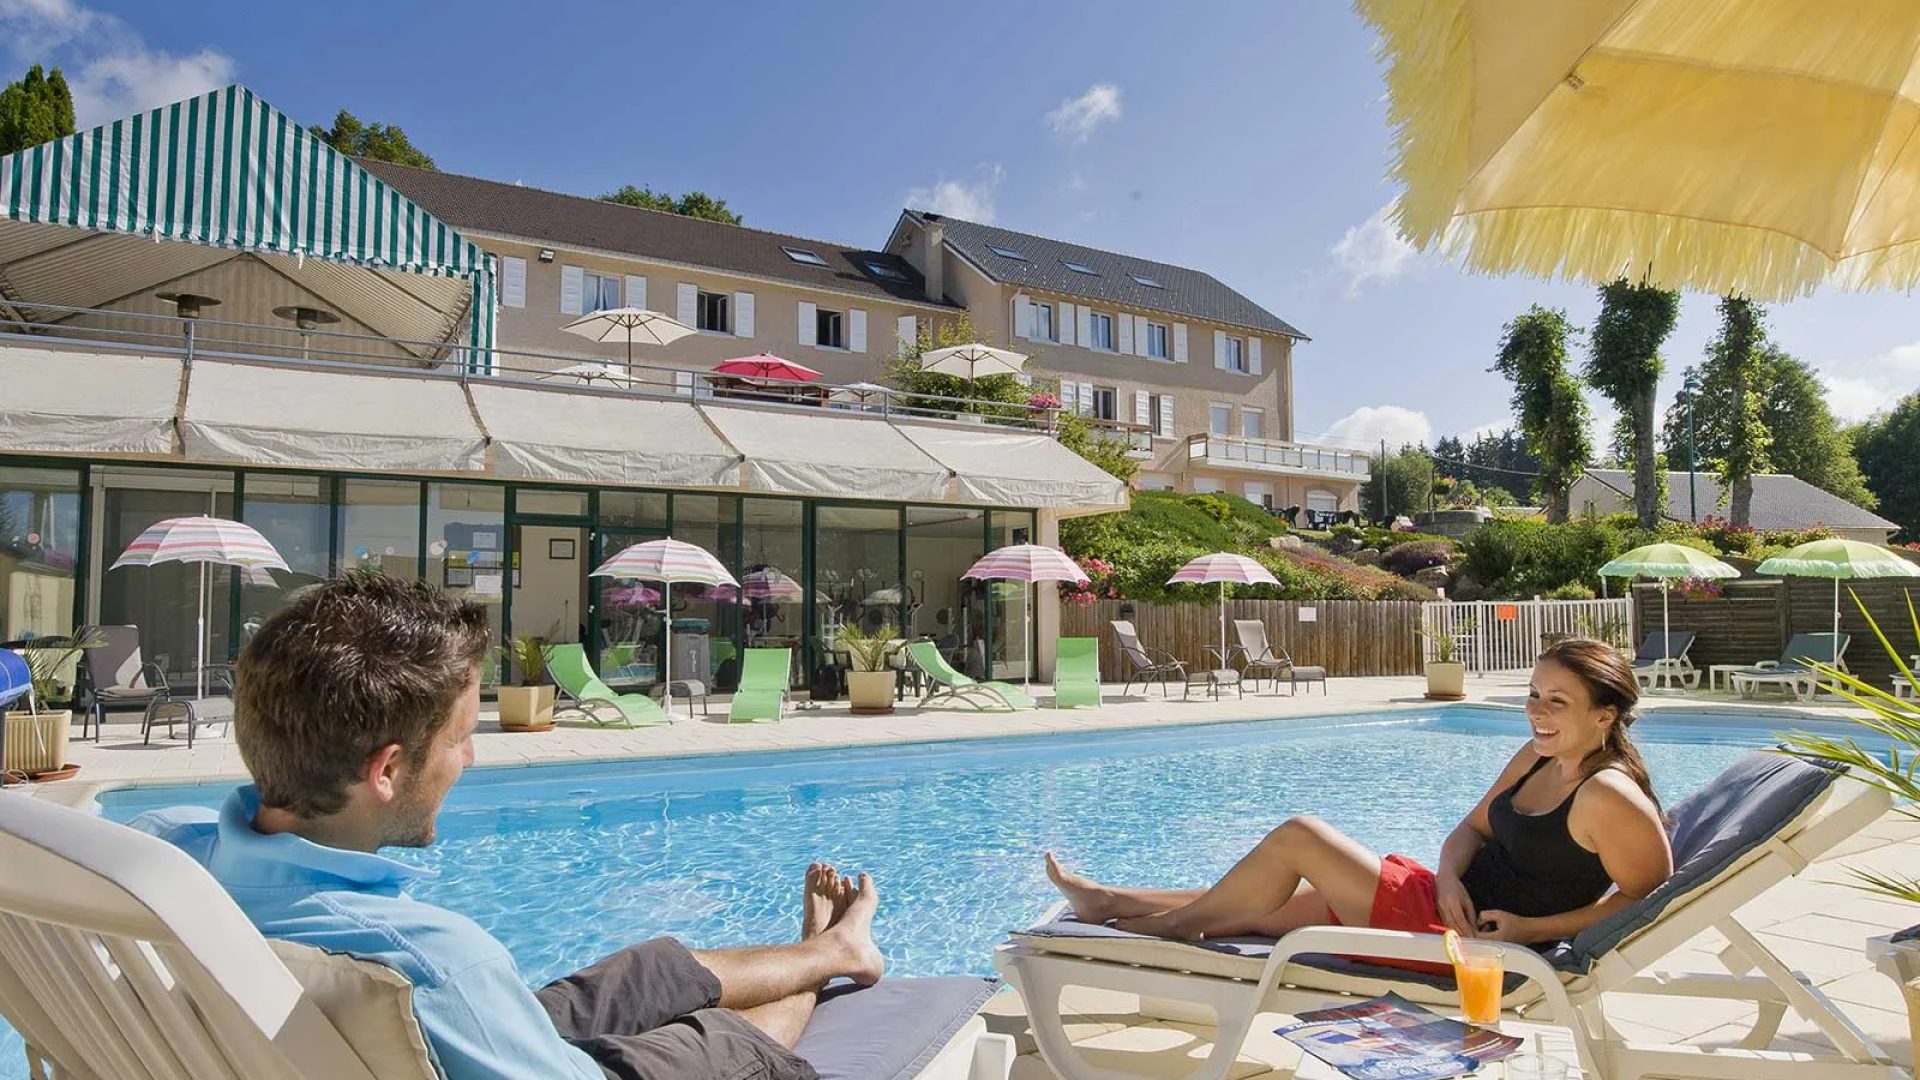 A couple relaxes by the outdoor swimming pool of the Bel Horizon hotel in Chambon-sur-Lignon in Haute-Loire